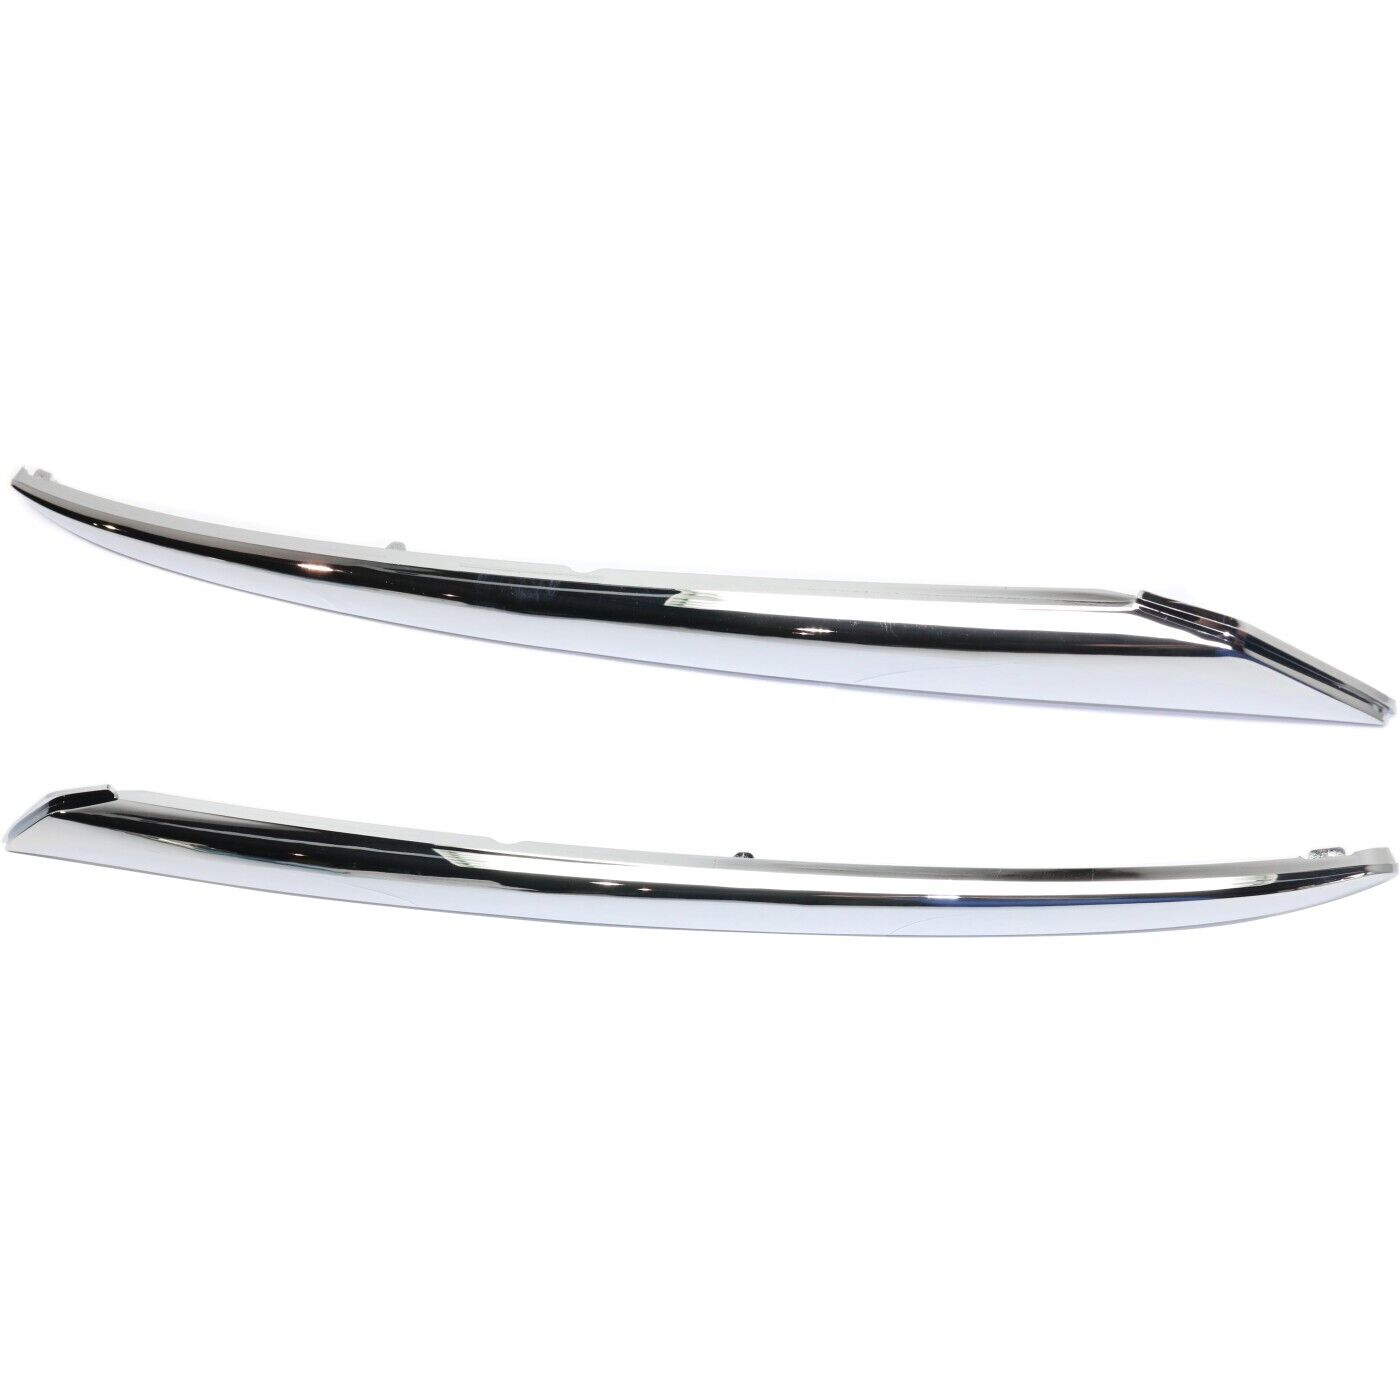 Bumper Trim Set For 2013-2016 Nissan Pathfinder Front Left and Right Chrome